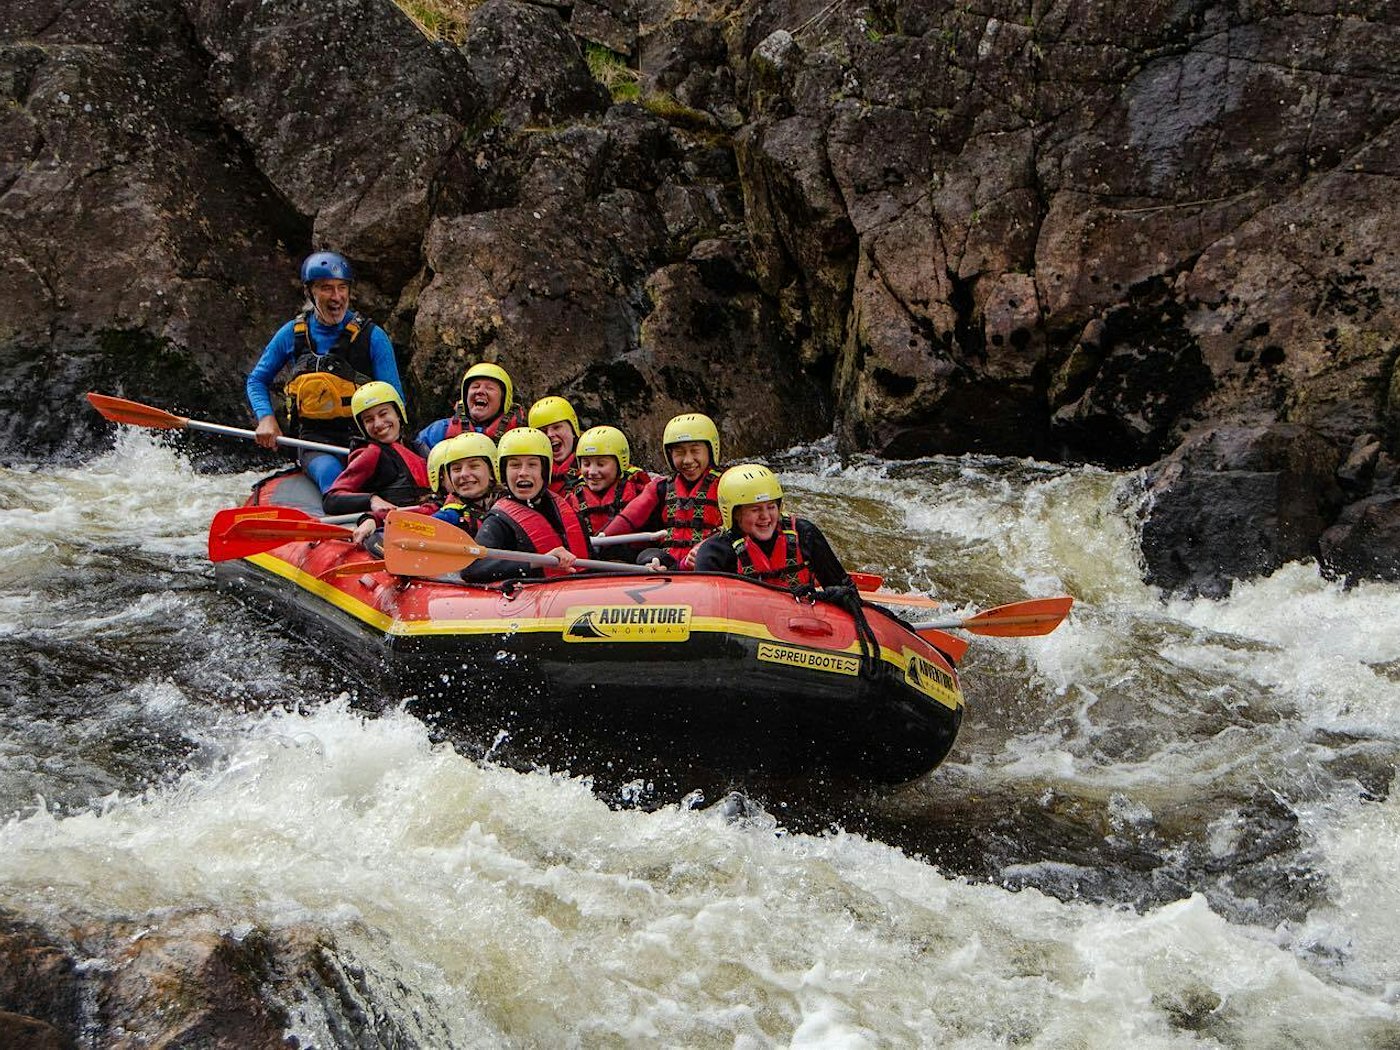 A group is rafting down a river in a boat. Everyone is laughing and enjoying themselves. Photo